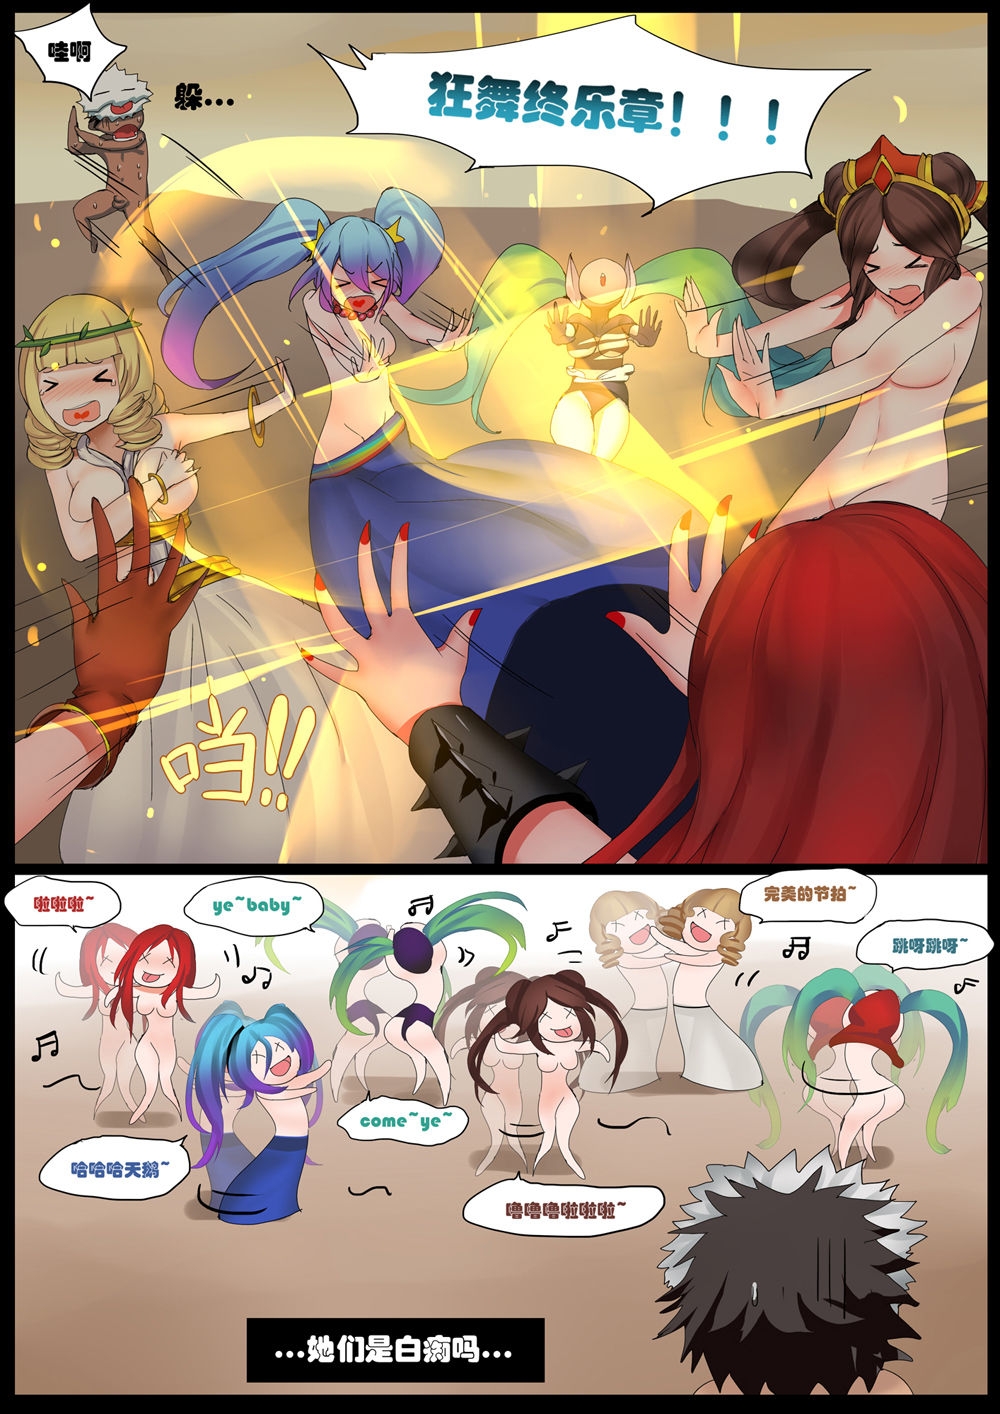 [Pd] Sona's Home Second Part (League of Legends) [Chinese] 16